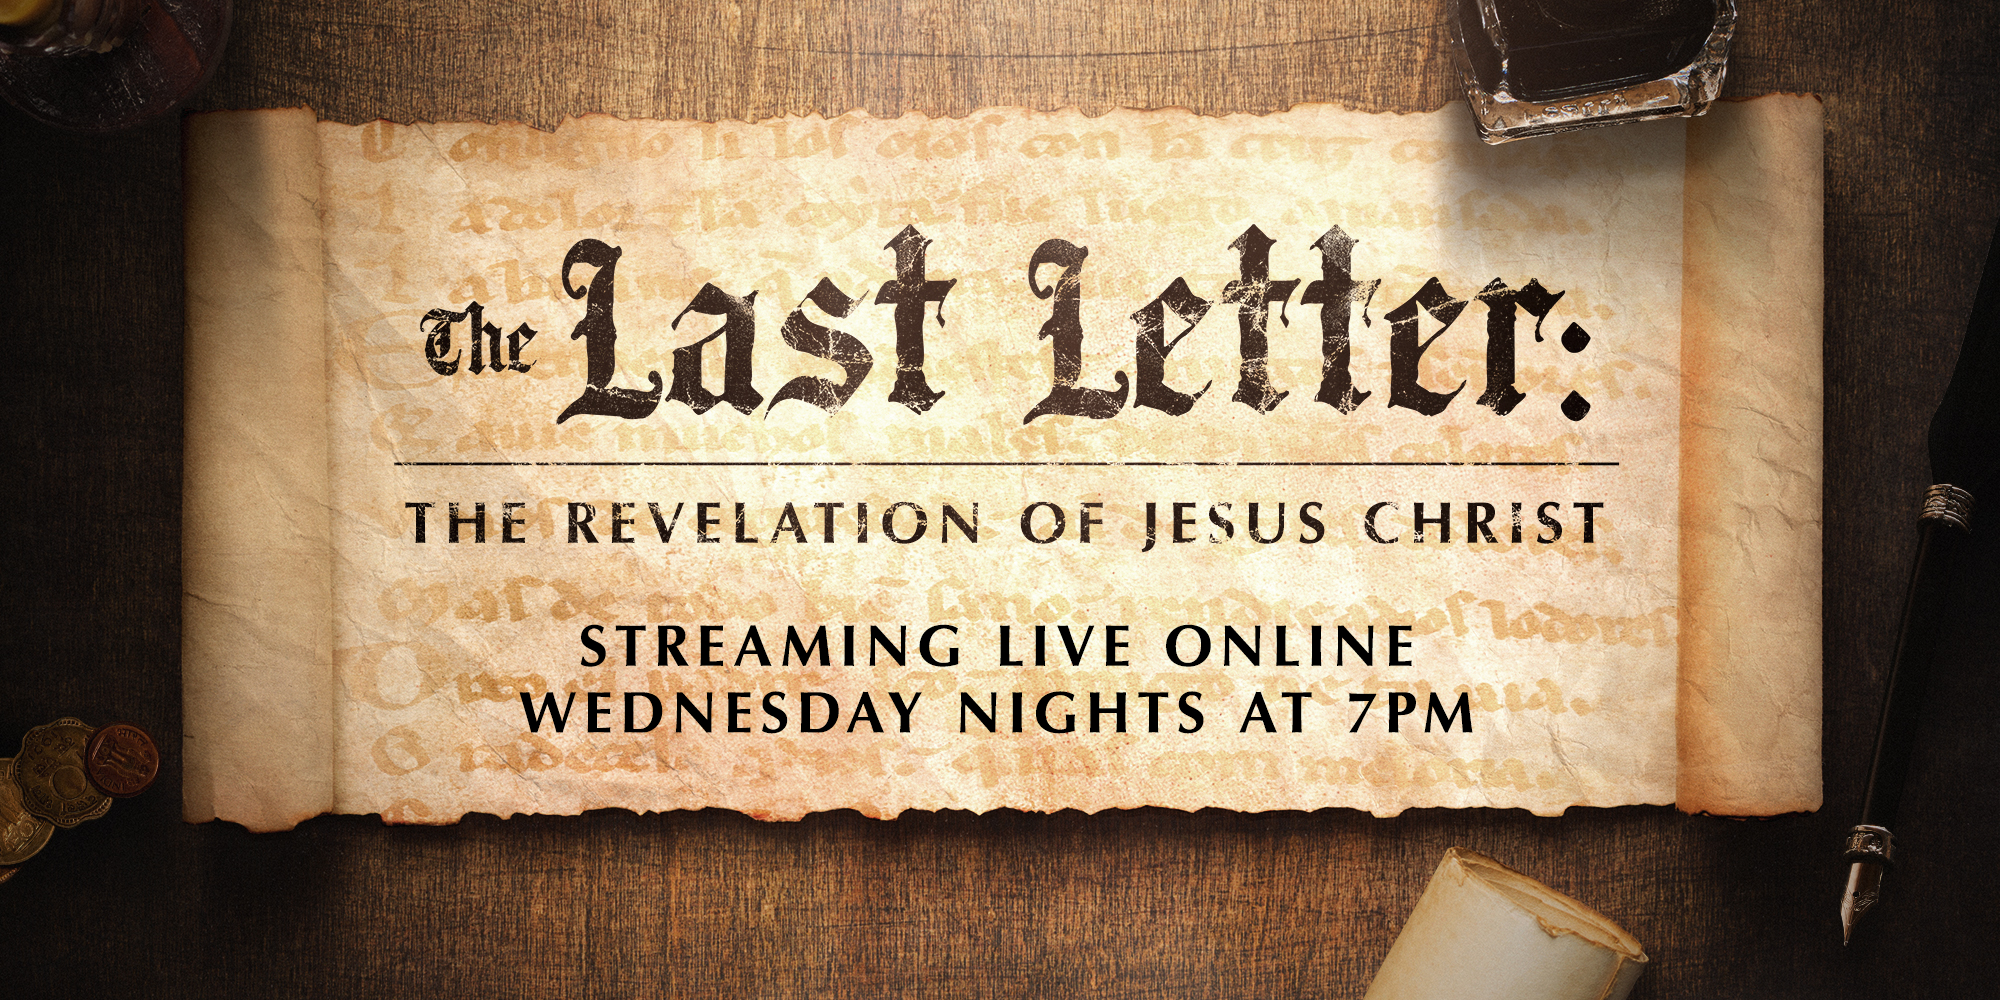 The Last Letter: The Revelation of Jesus Christ Streaming Live Online Wednesday Nights at 7PM